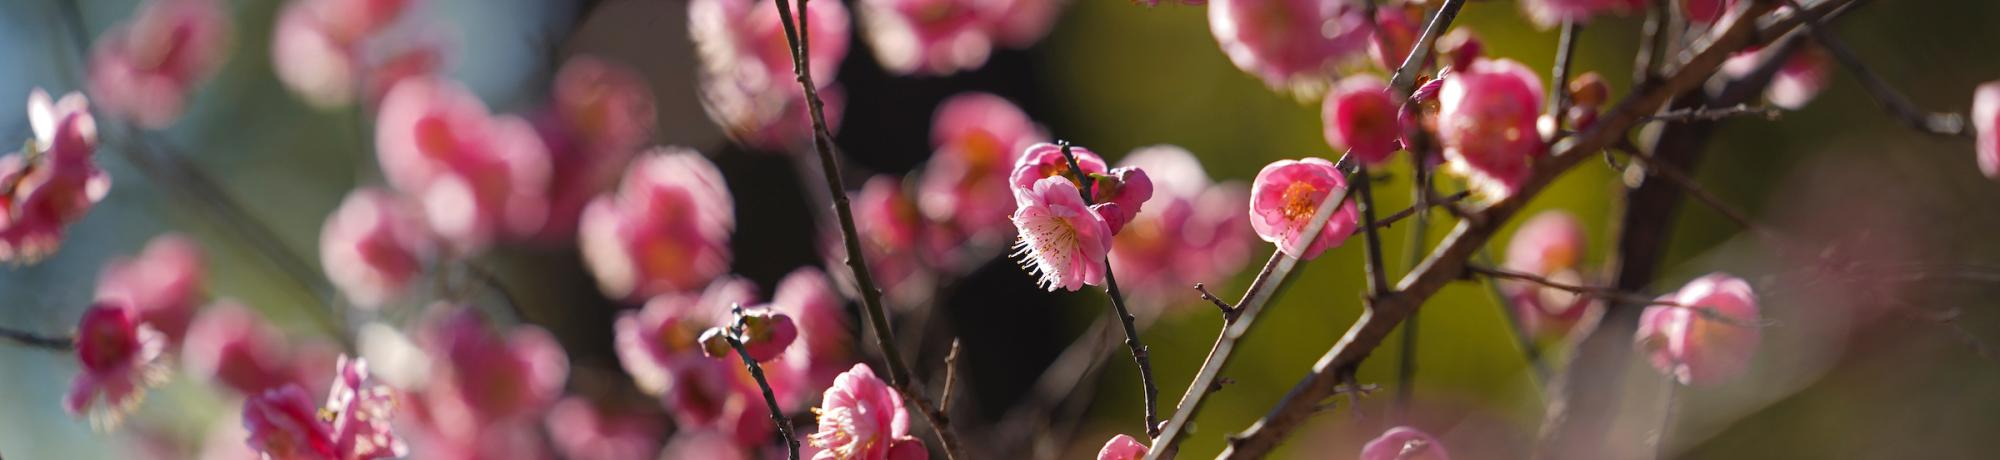 A close-up of budding pink flowers.